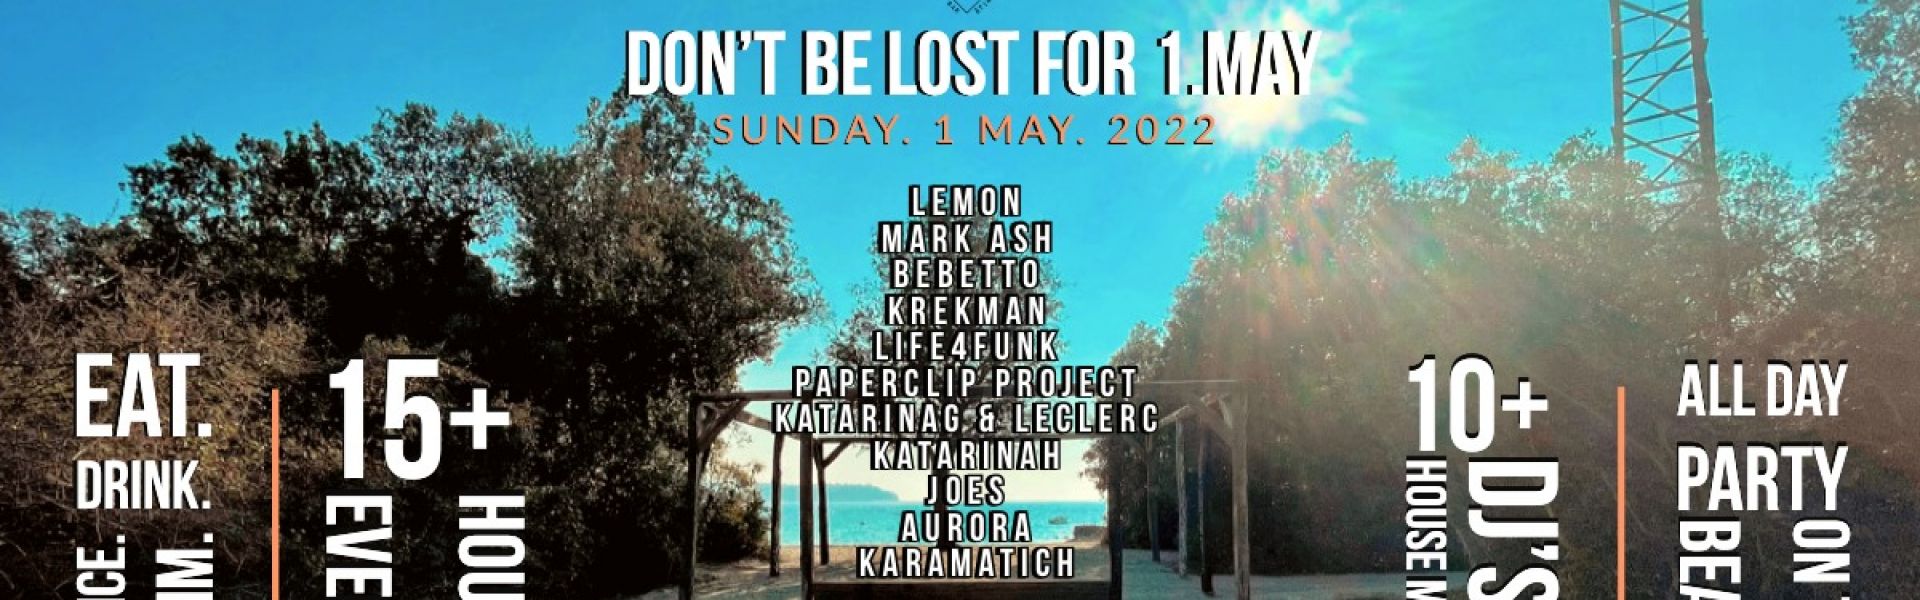 Dont be lost for 1. May